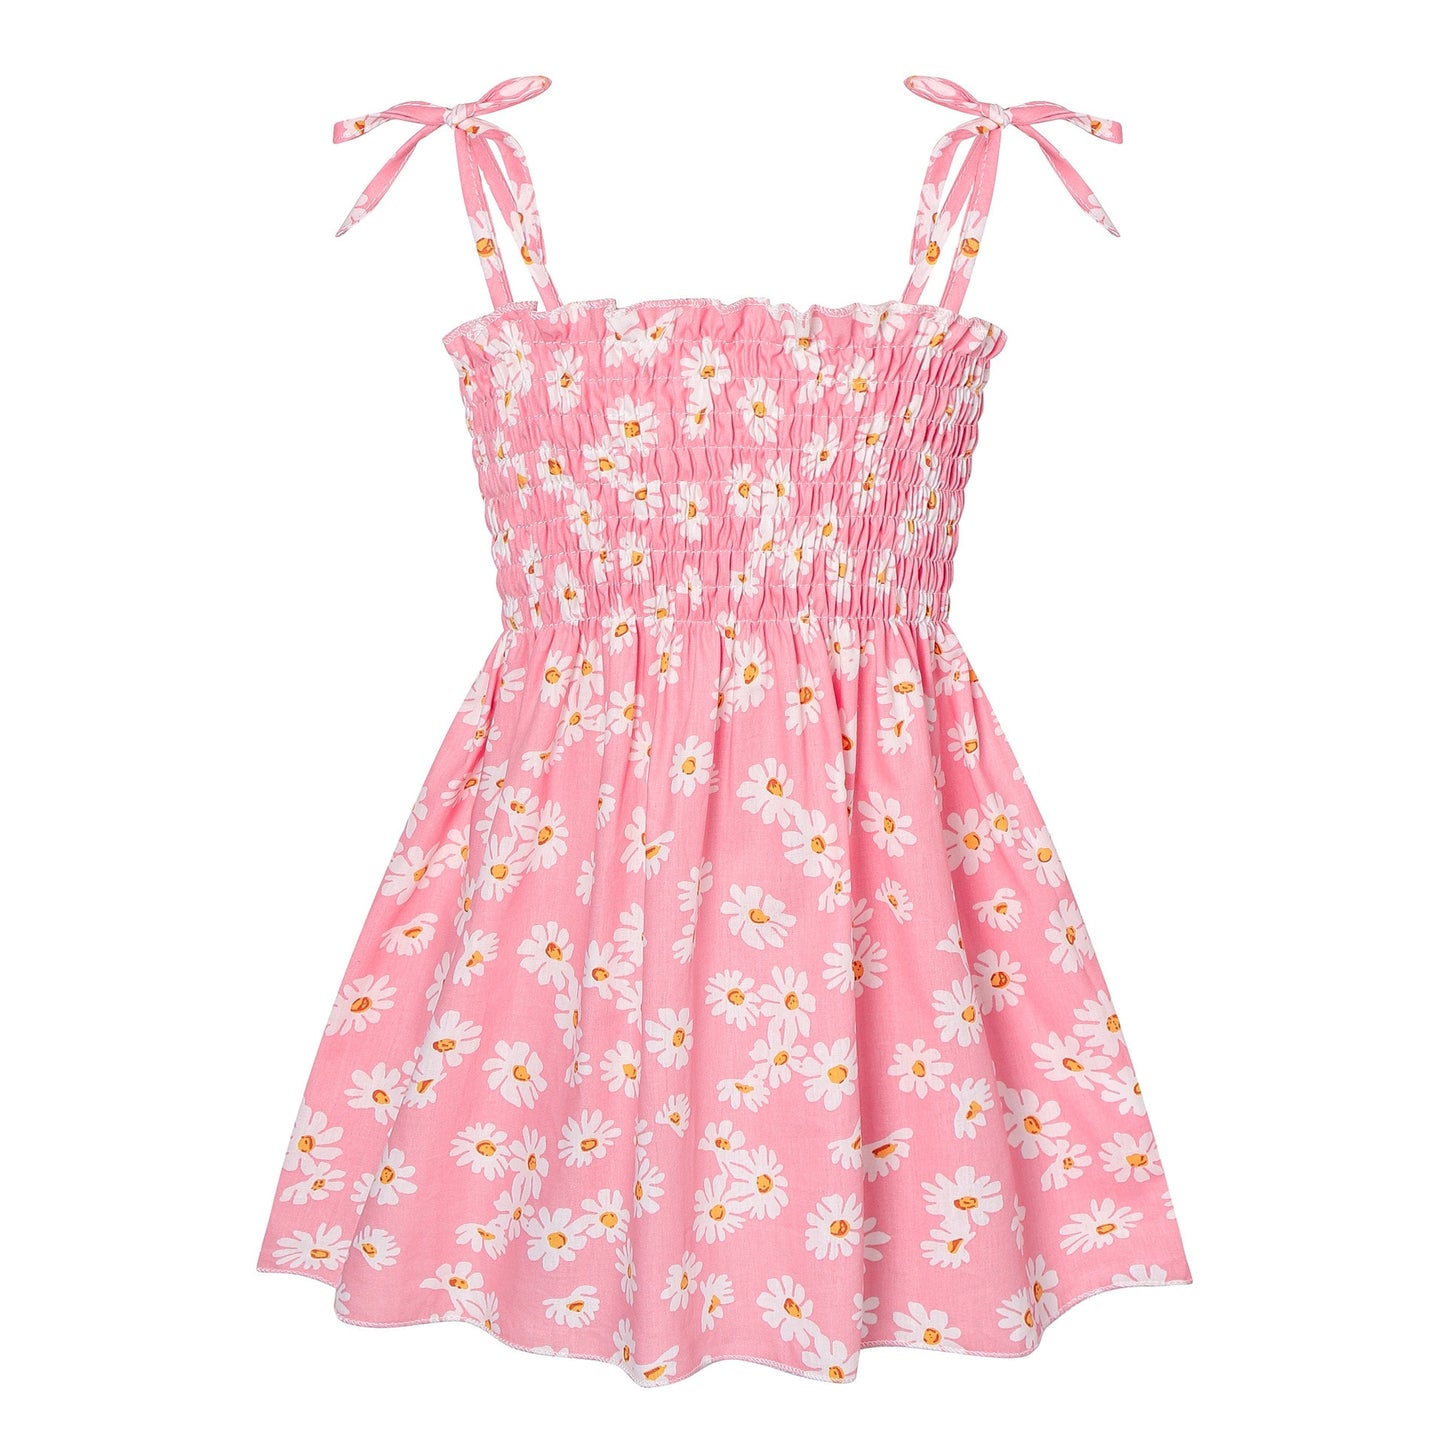 Gisela Splicing Summer Dresses child Outfits Beach Clothes - GuGuTon